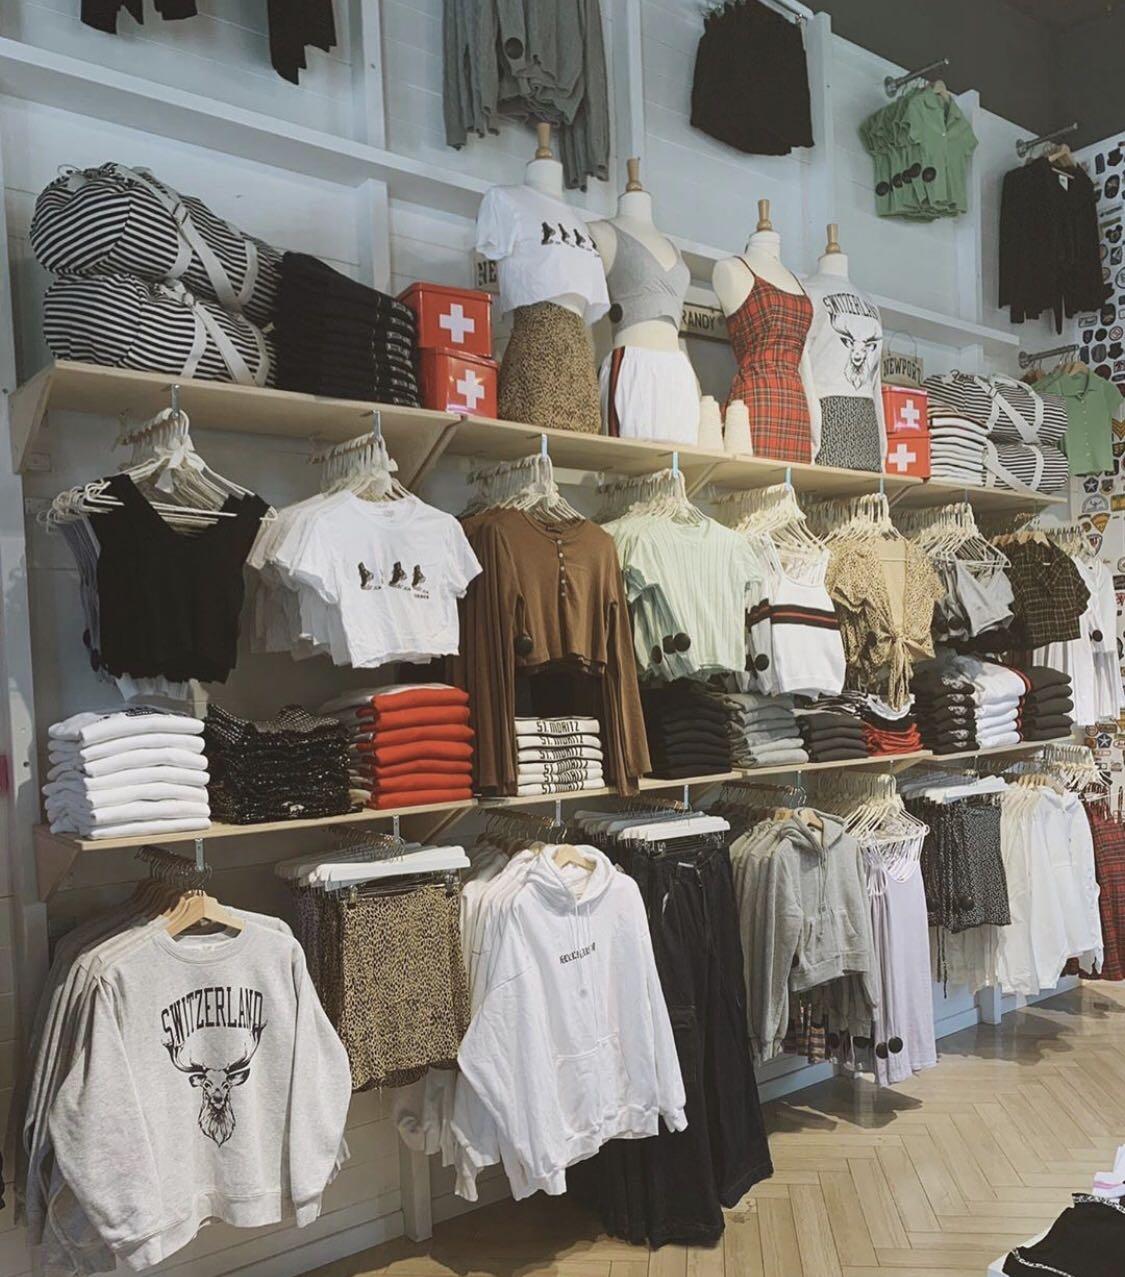 Brandy Melville Women's Clothes for sale in Mexico City, Mexico